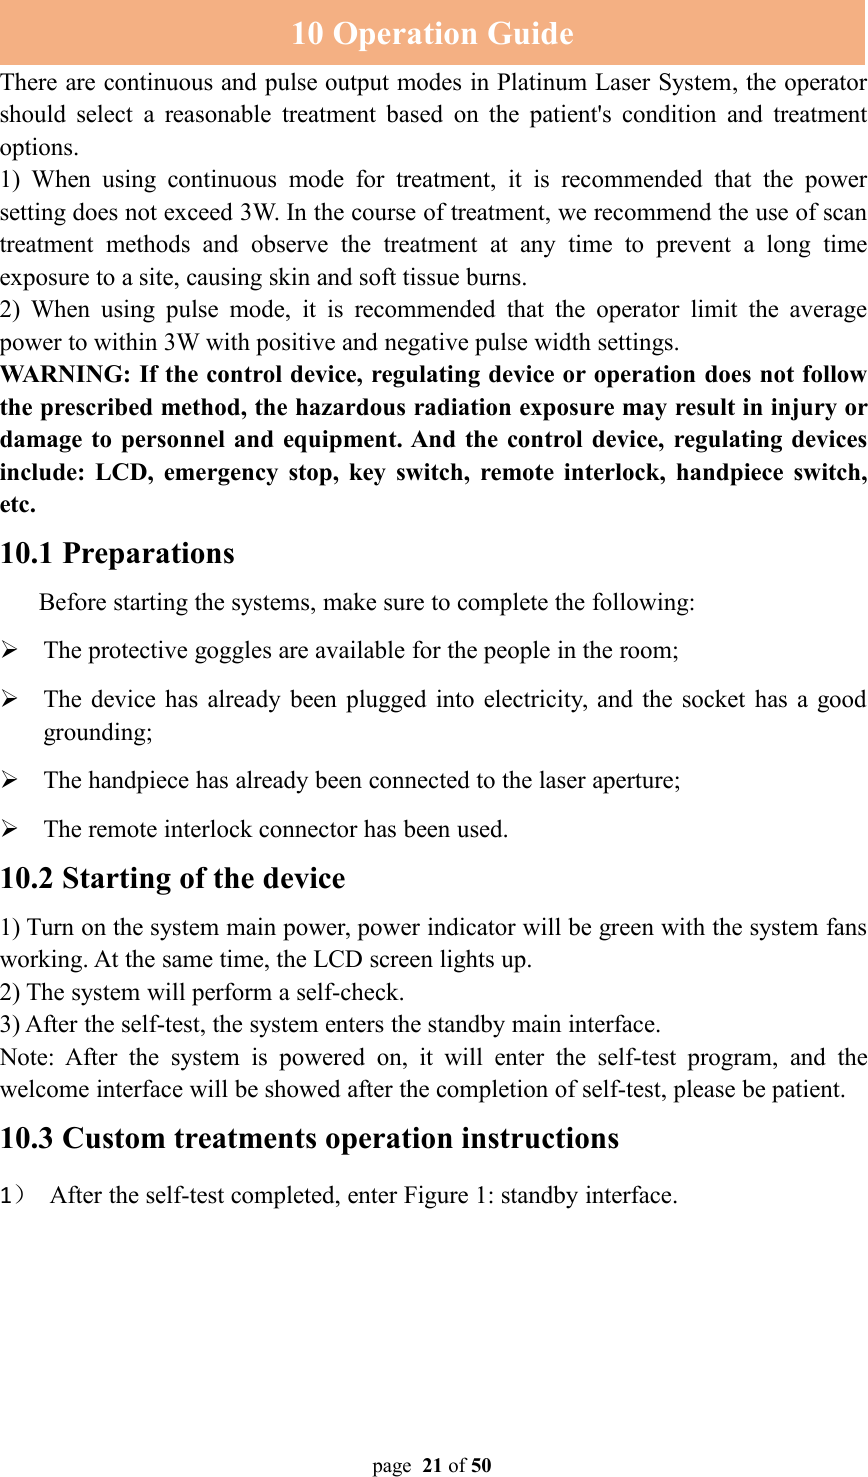 page 21 of 5010 Operation GuideThere are continuous and pulse output modes in Platinum Laser System, the operatorshould select a reasonable treatment based on the patient&apos;s condition and treatmentoptions.1) When using continuous mode for treatment, it is recommended that the powersetting does not exceed 3W. In the course of treatment, we recommend the use of scantreatment methods and observe the treatment at any time to prevent a long timeexposure to a site, causing skin and soft tissue burns.2) When using pulse mode, it is recommended that the operator limit the averagepower to within 3W with positive and negative pulse width settings.WARNING: If the control device, regulating device or operation does not followthe prescribed method, the hazardous radiation exposure may result in injury ordamage to personnel and equipment. And the control device, regulating devicesinclude: LCD, emergency stop, key switch, remote interlock, handpiece switch,etc.10.1 PreparationsBefore starting the systems, make sure to complete the following:The protective goggles are available for the people in the room;The device has already been plugged into electricity, and the socket has a goodgrounding;The handpiece has already been connected to the laser aperture;The remote interlock connector has been used.10.2 Starting of the device1) Turn on the system main power, power indicator will be green with the system fansworking. At the same time, the LCD screen lights up.2) The system will perform a self-check.3) After the self-test, the system enters the standby main interface.Note: After the system is powered on, it will enter the self-test program, and thewelcome interface will be showed after the completion of self-test, please be patient.10.3 Custom treatments operation instructions1）After the self-test completed, enter Figure 1: standby interface.